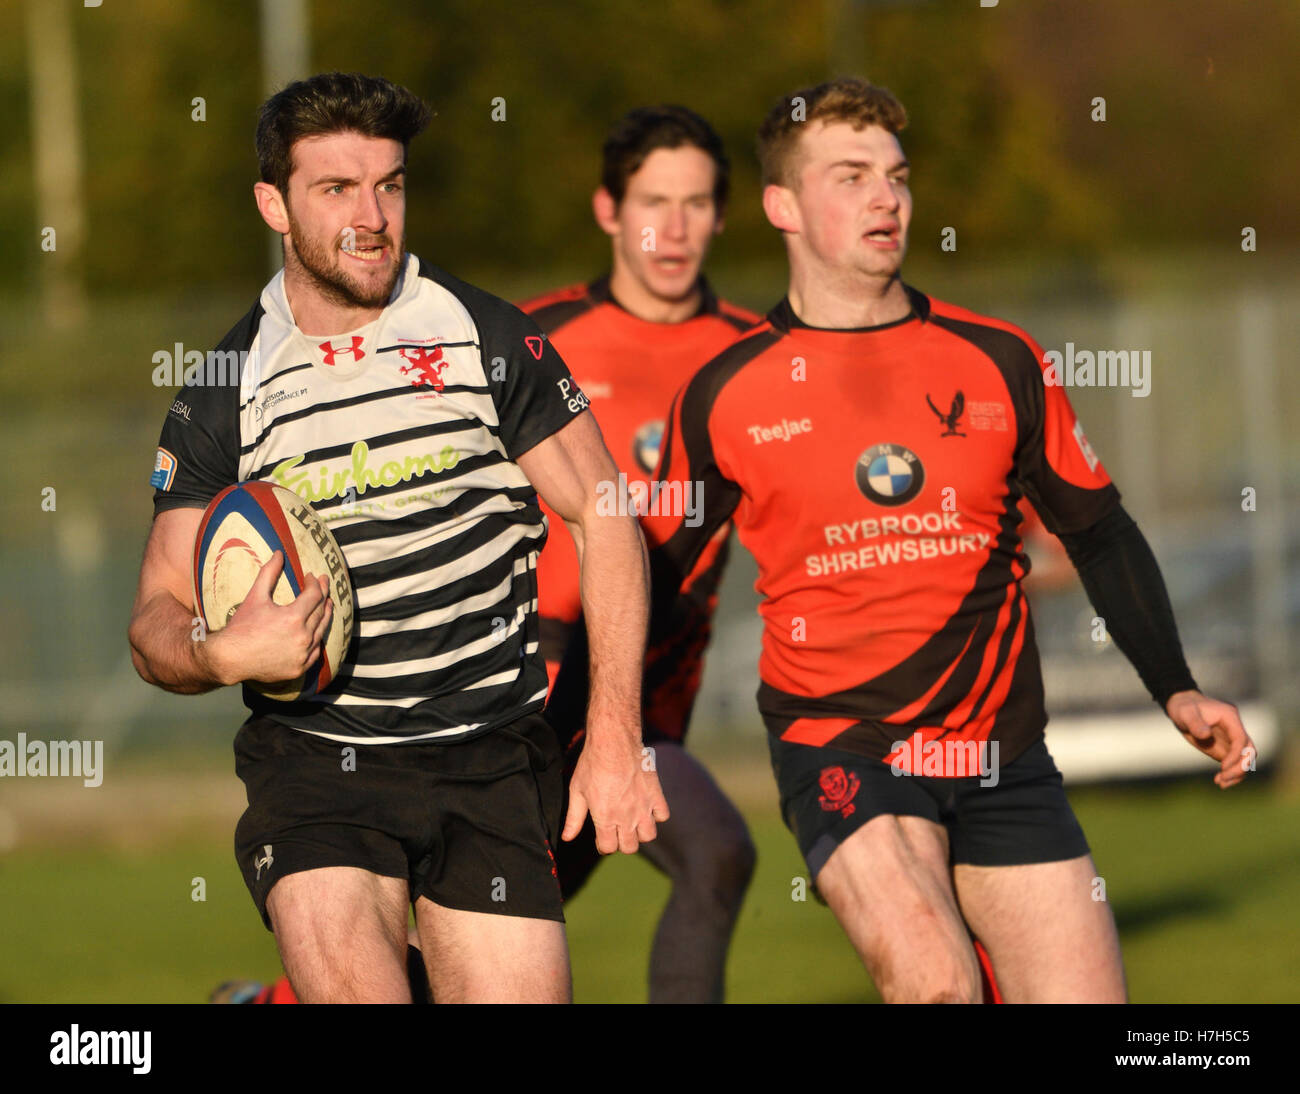 Manchester  UK 5th November 2016  Action from the South Lancashire/Cheshire Division 1 match between Broughton Park, in black, and Oswestrys, in red. Broughton Park win 62-0, after leading 22-0 at half-time to move into second place and keep Oswestry in bottom place. Stock Photo